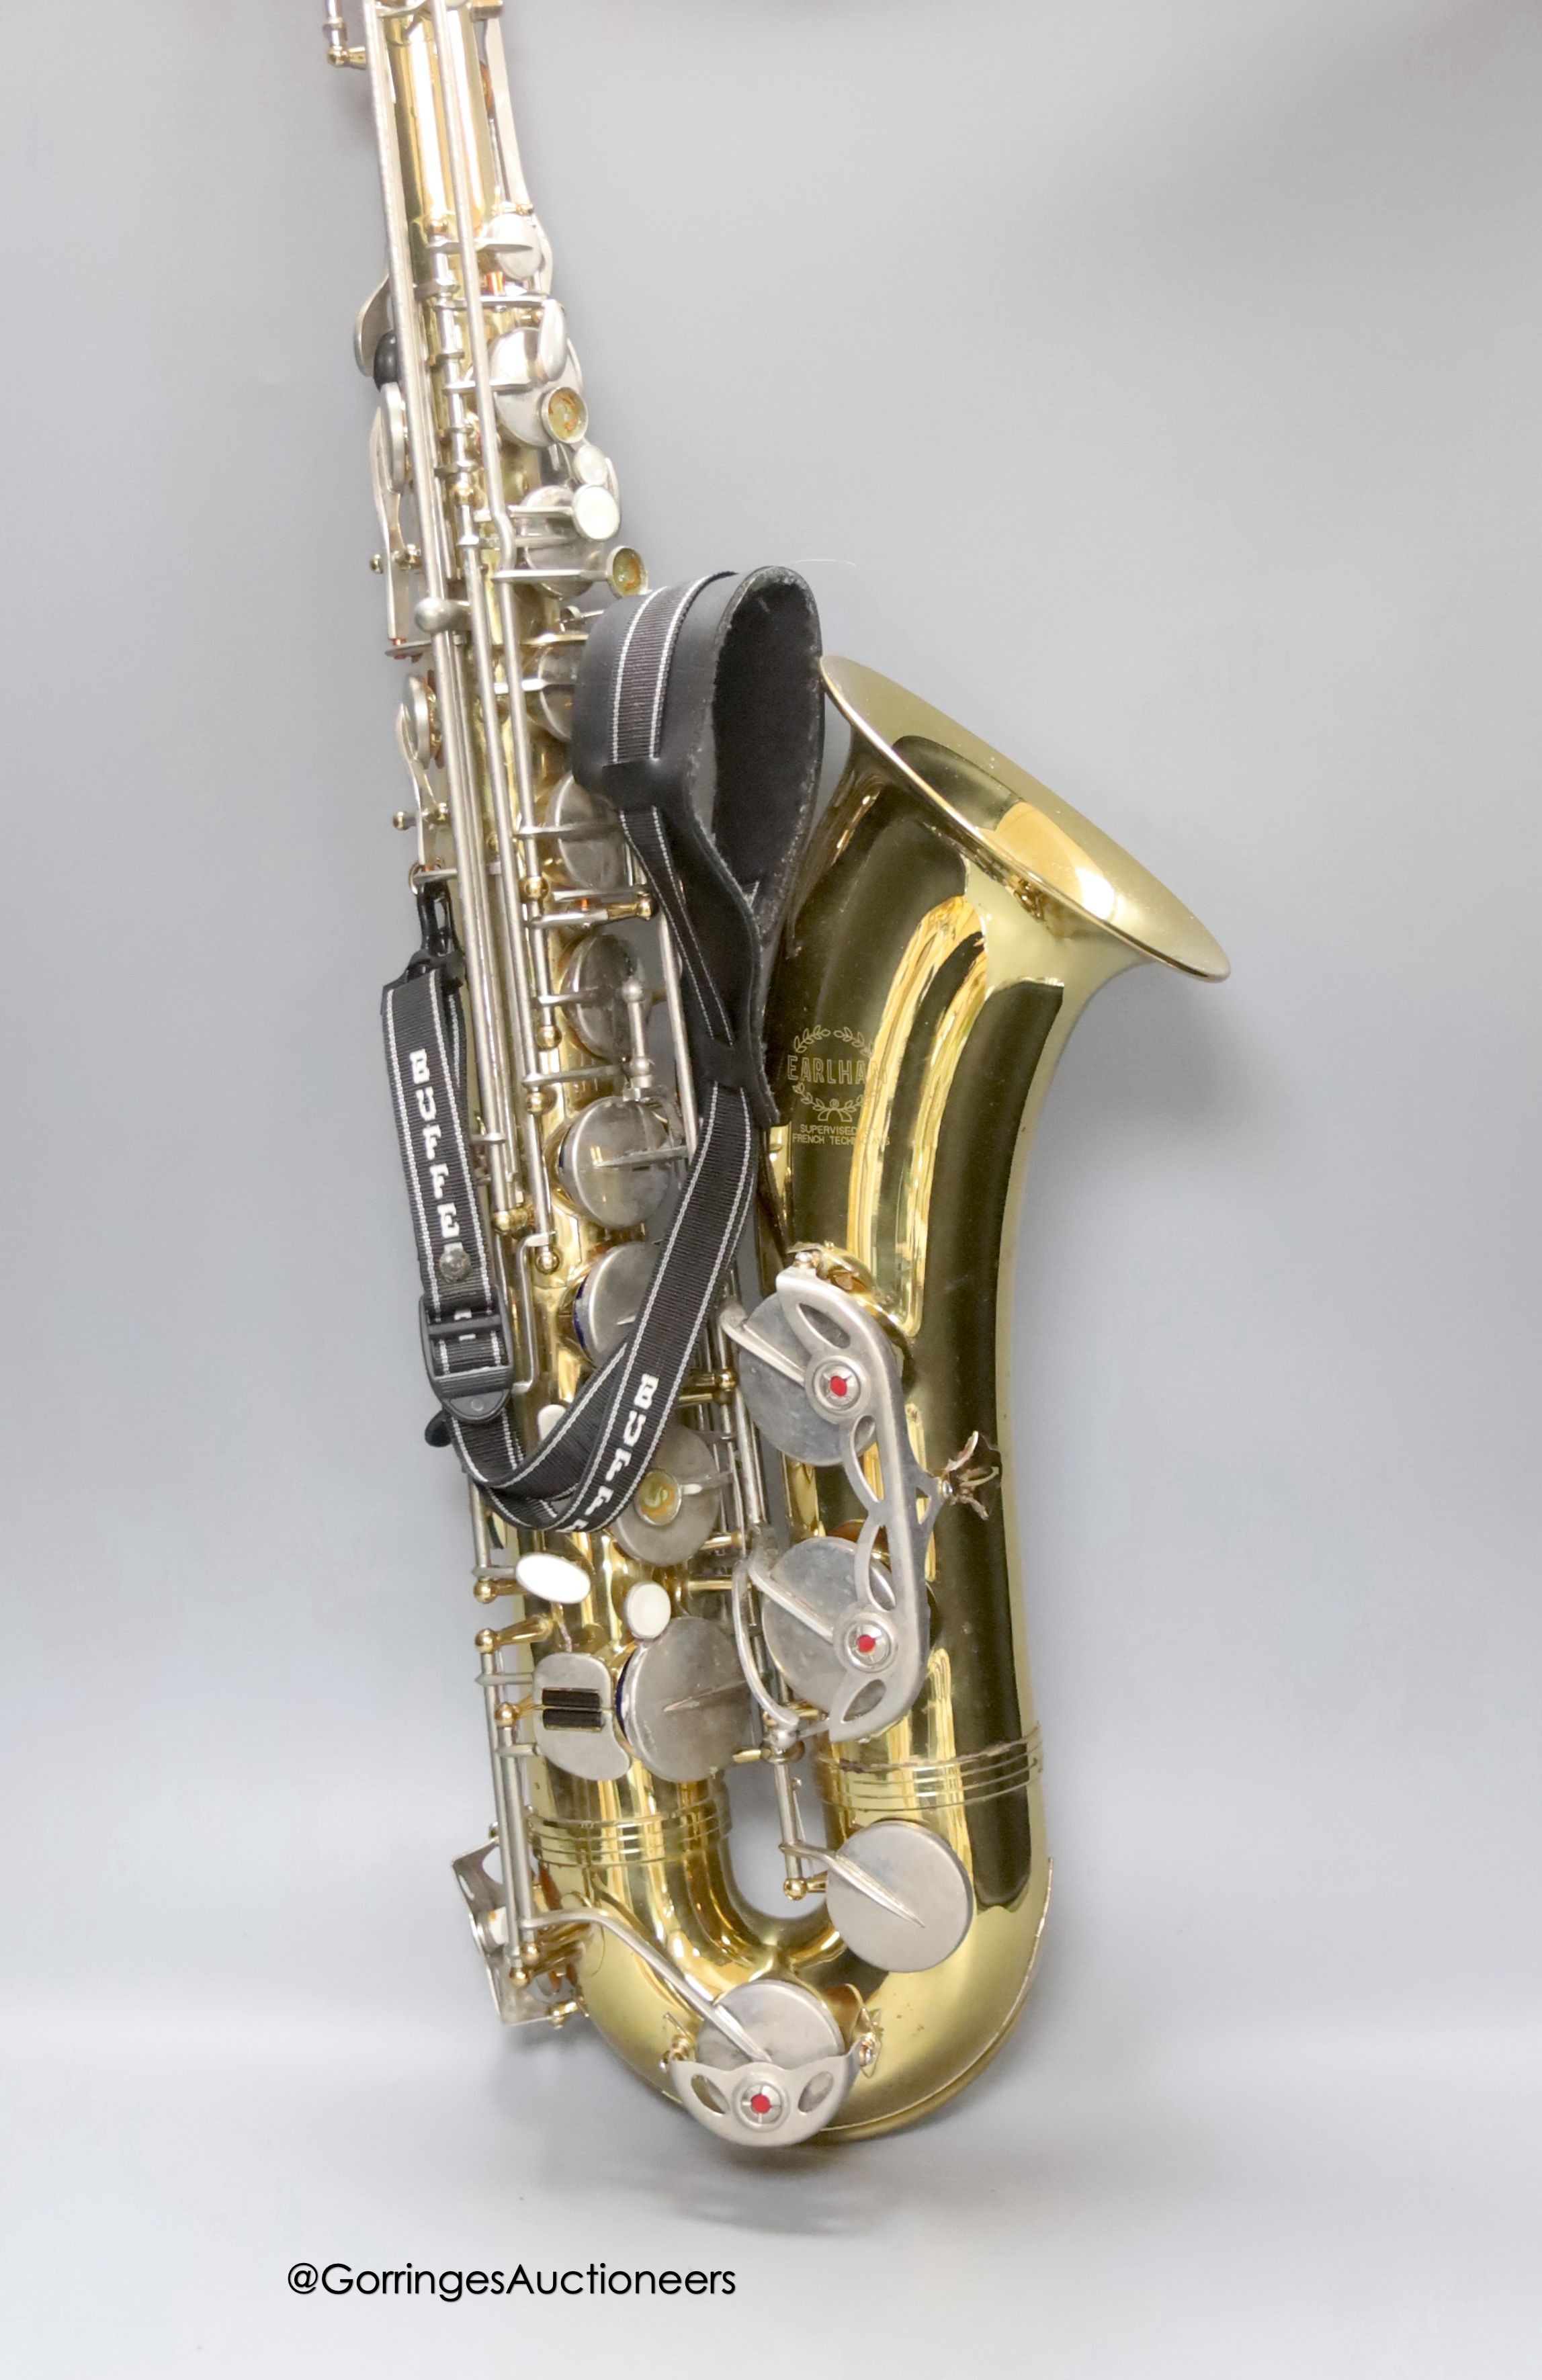 A cased Earlham brass saxophone and music sheets